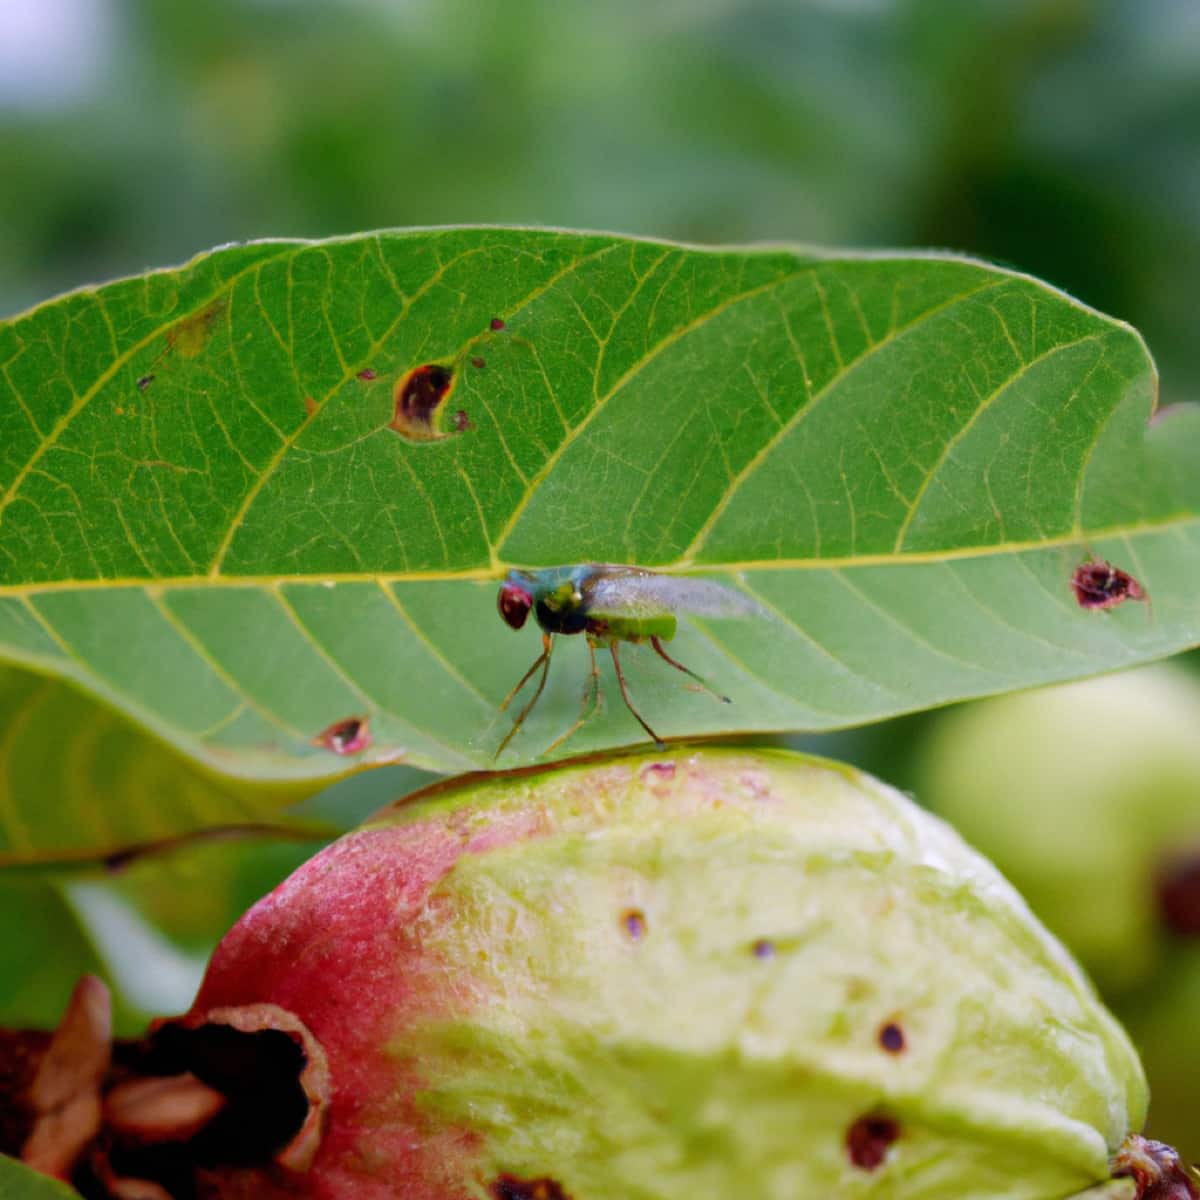 https://www.agrifarming.in/wp-content/uploads/Key-Rules-to-Get-Rid-of-Fruit-Fly-in-Guava1.jpg